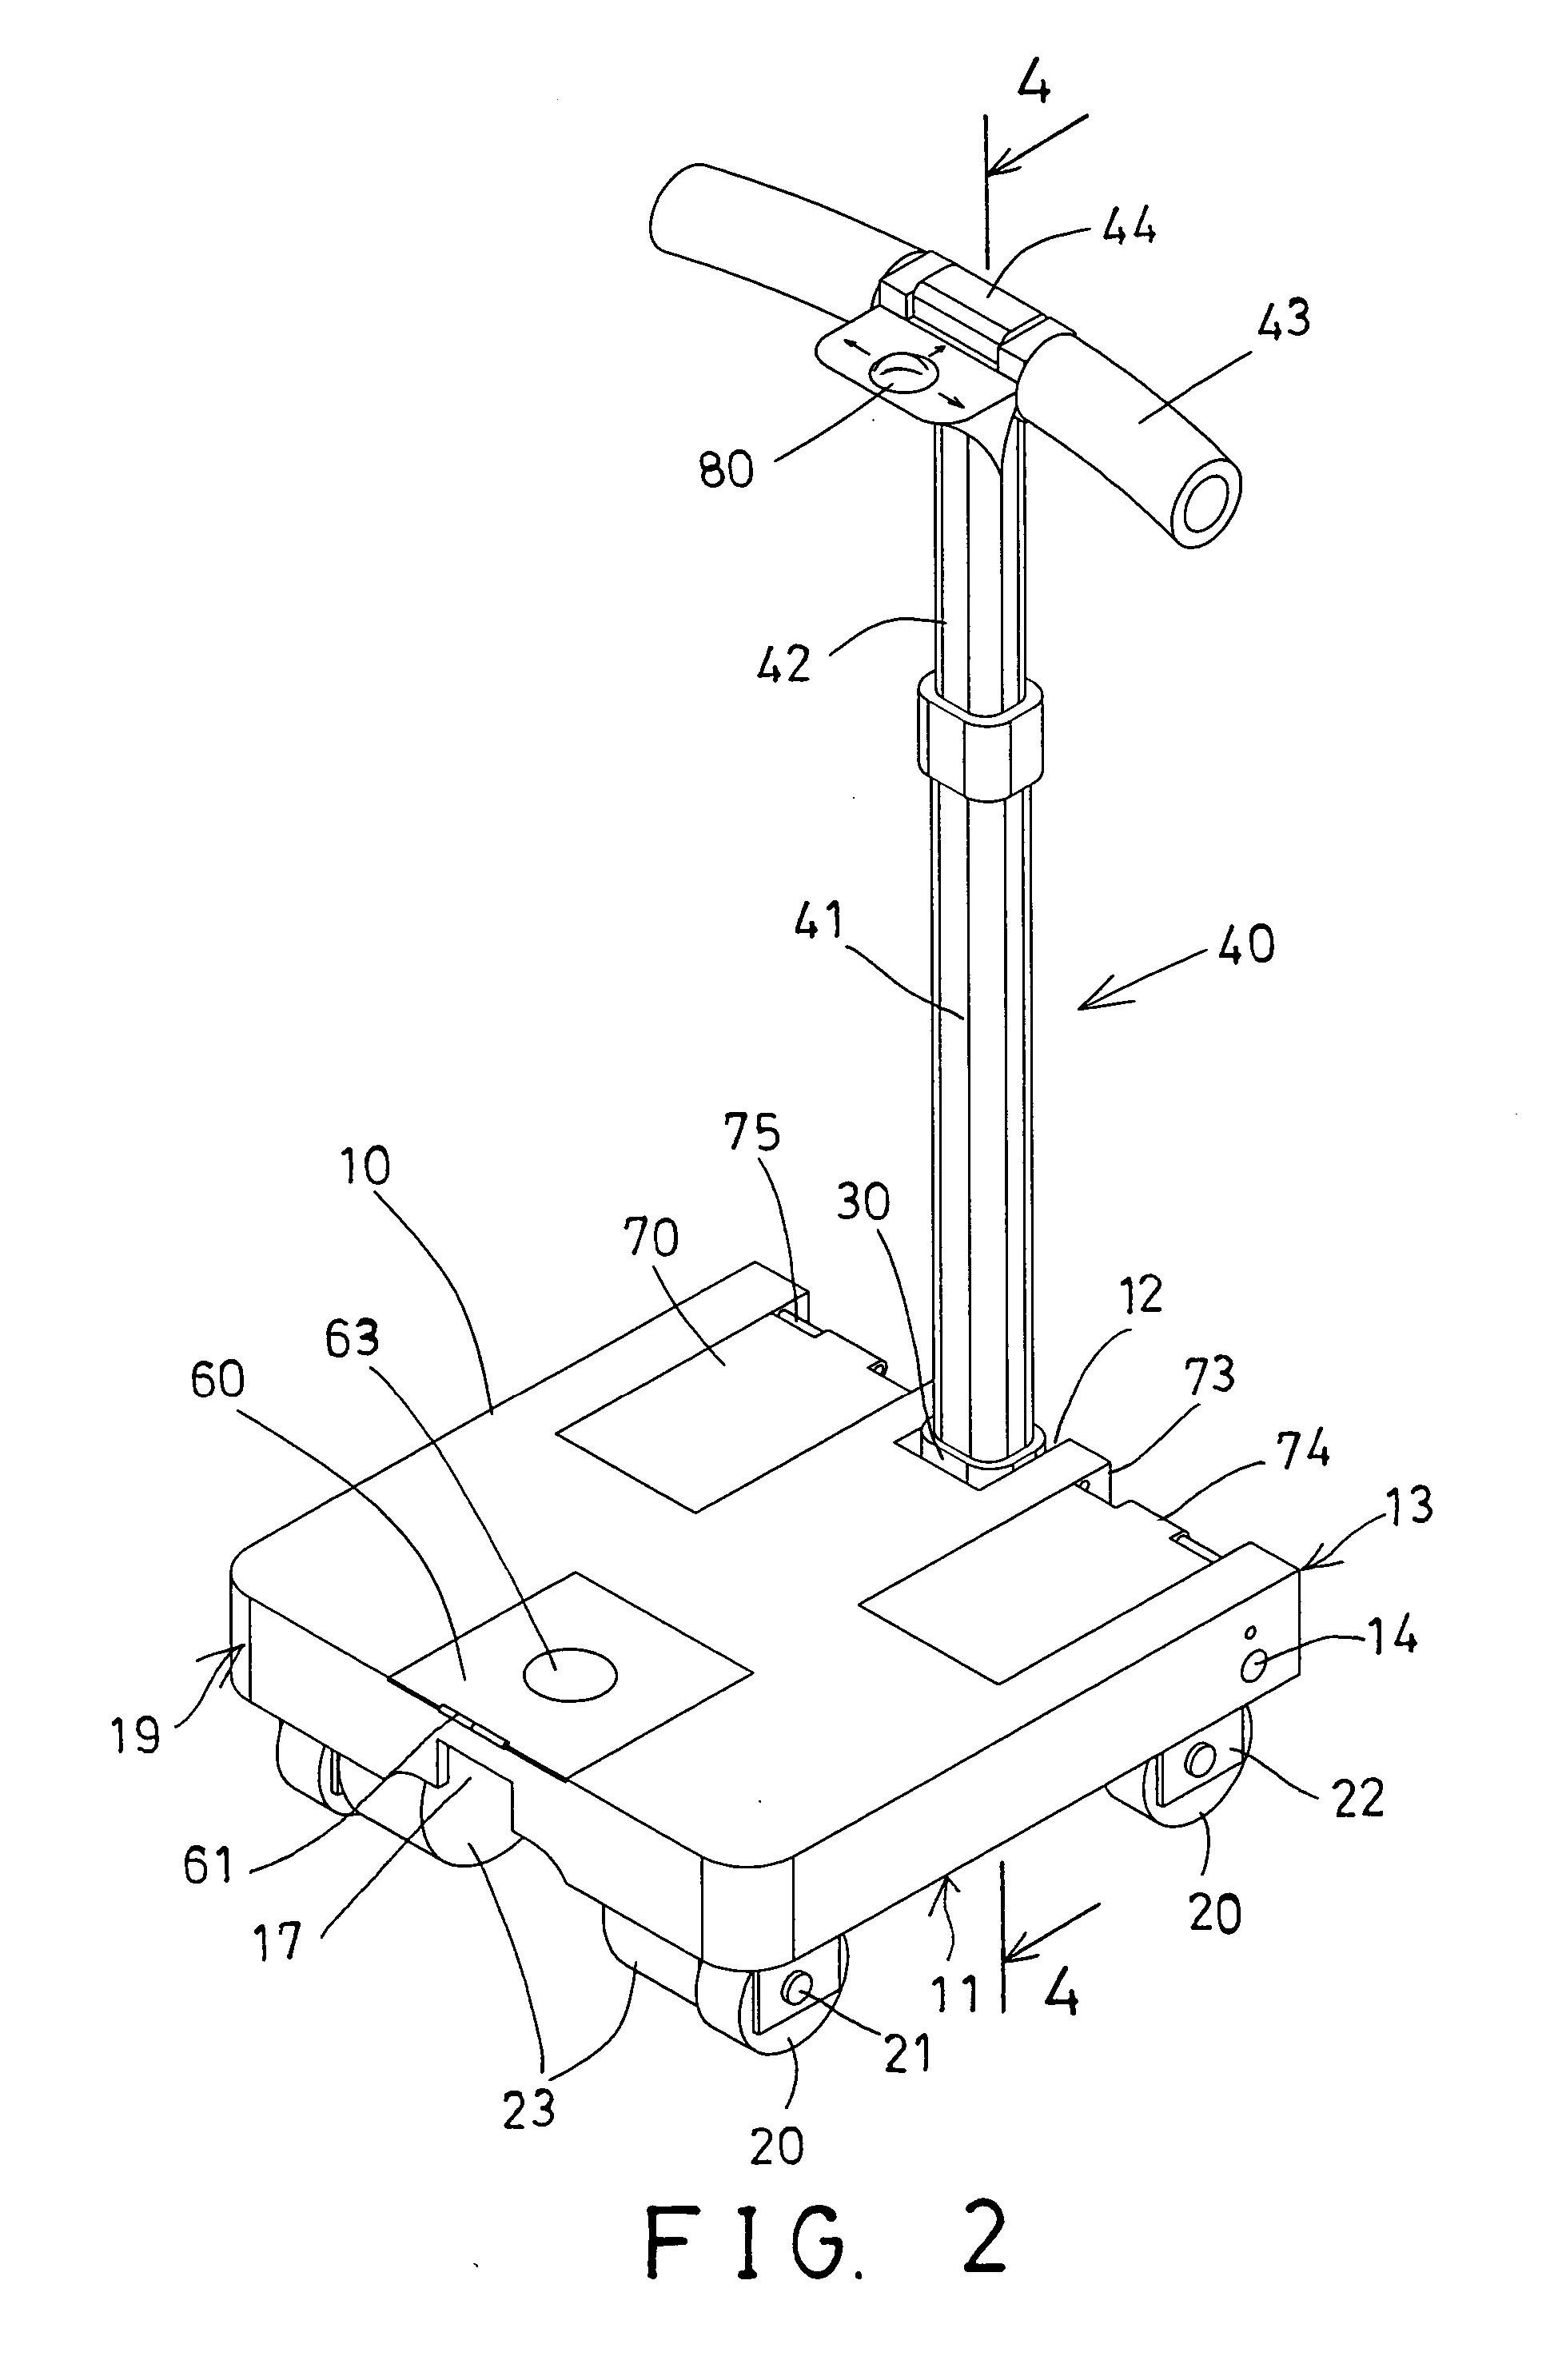 Article carrying cart